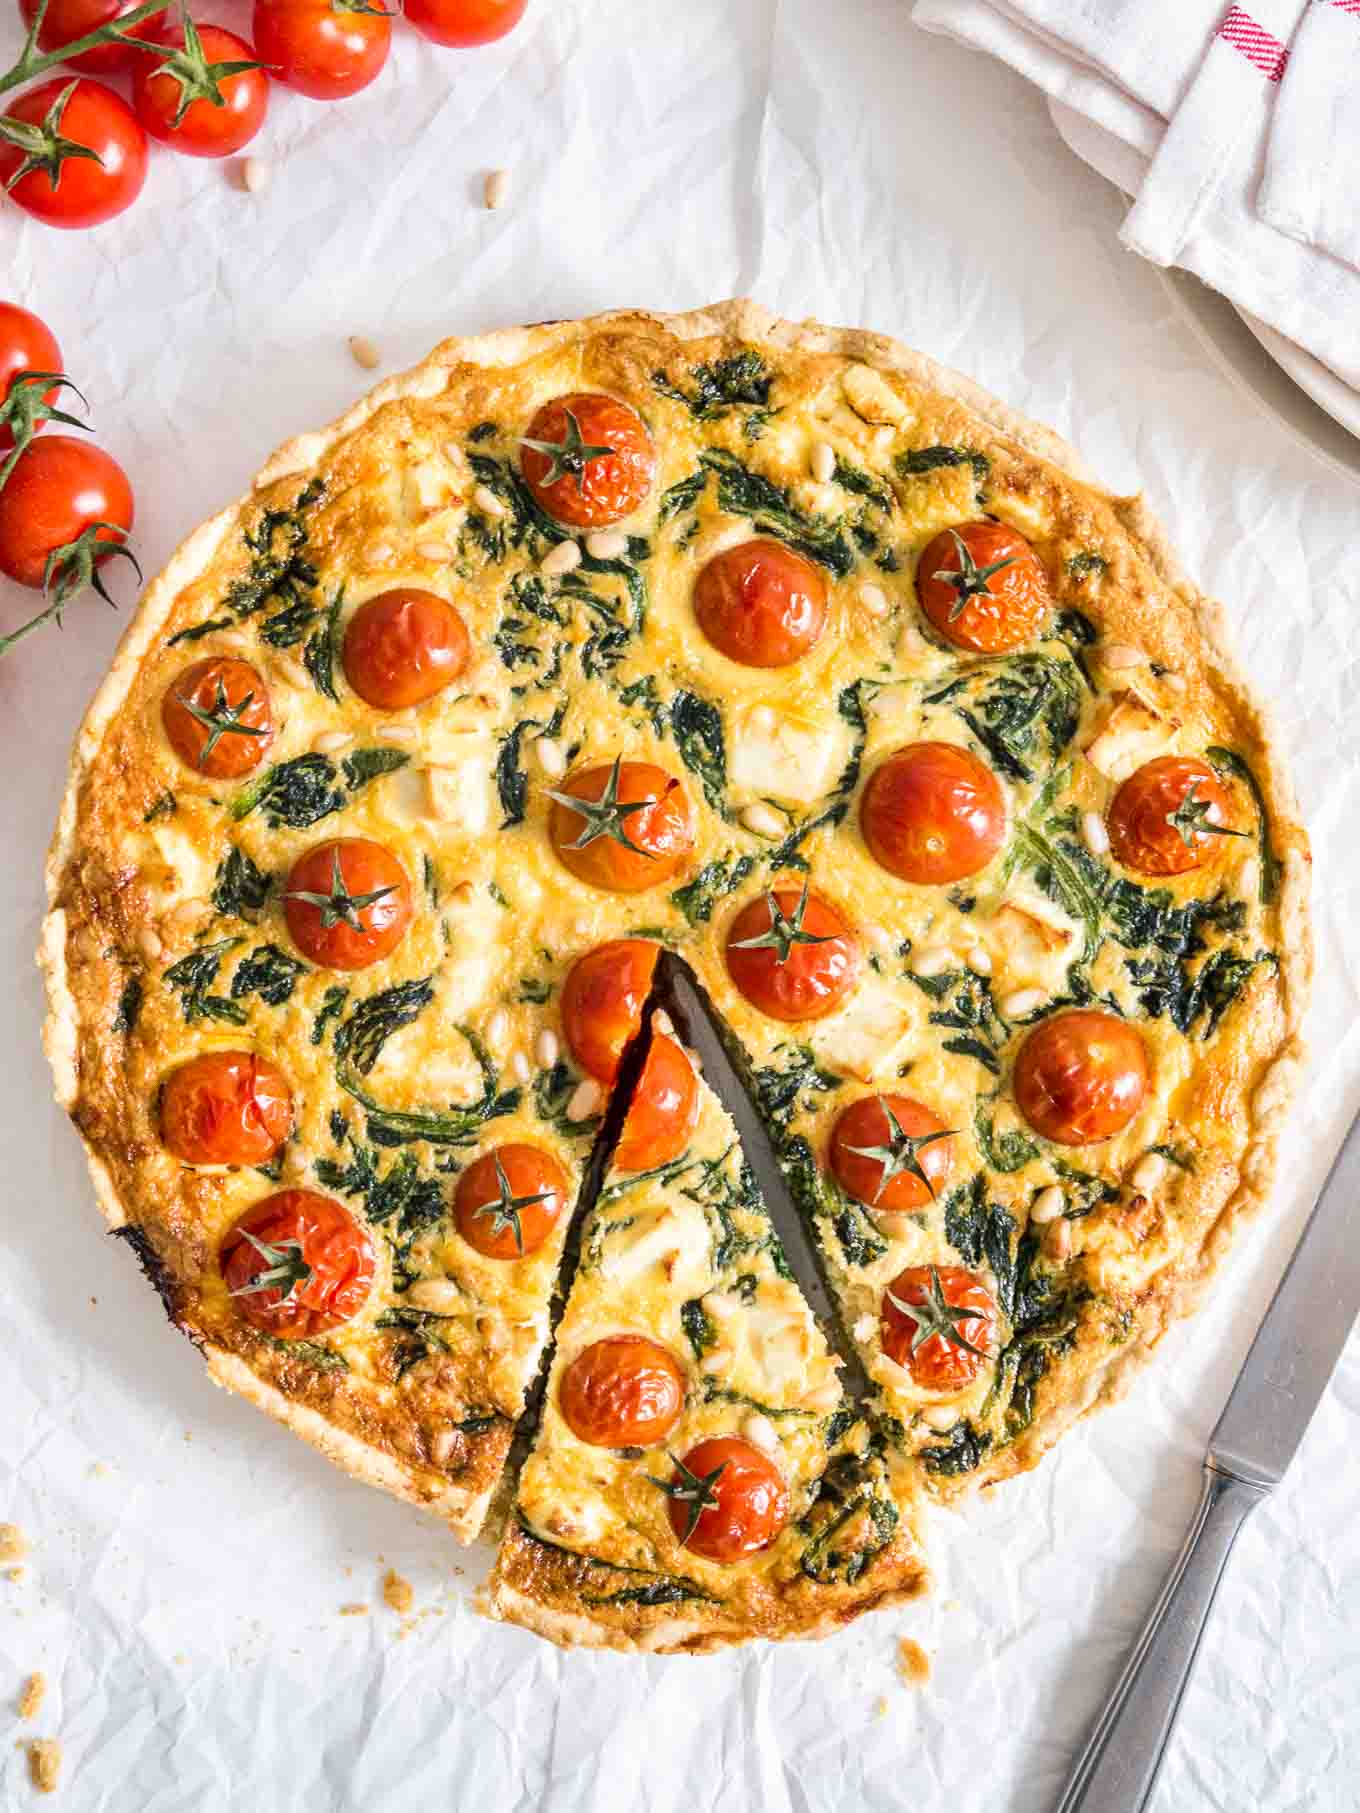 Spinach Quiche with Tomatoes and Cheese | Plated Cravings